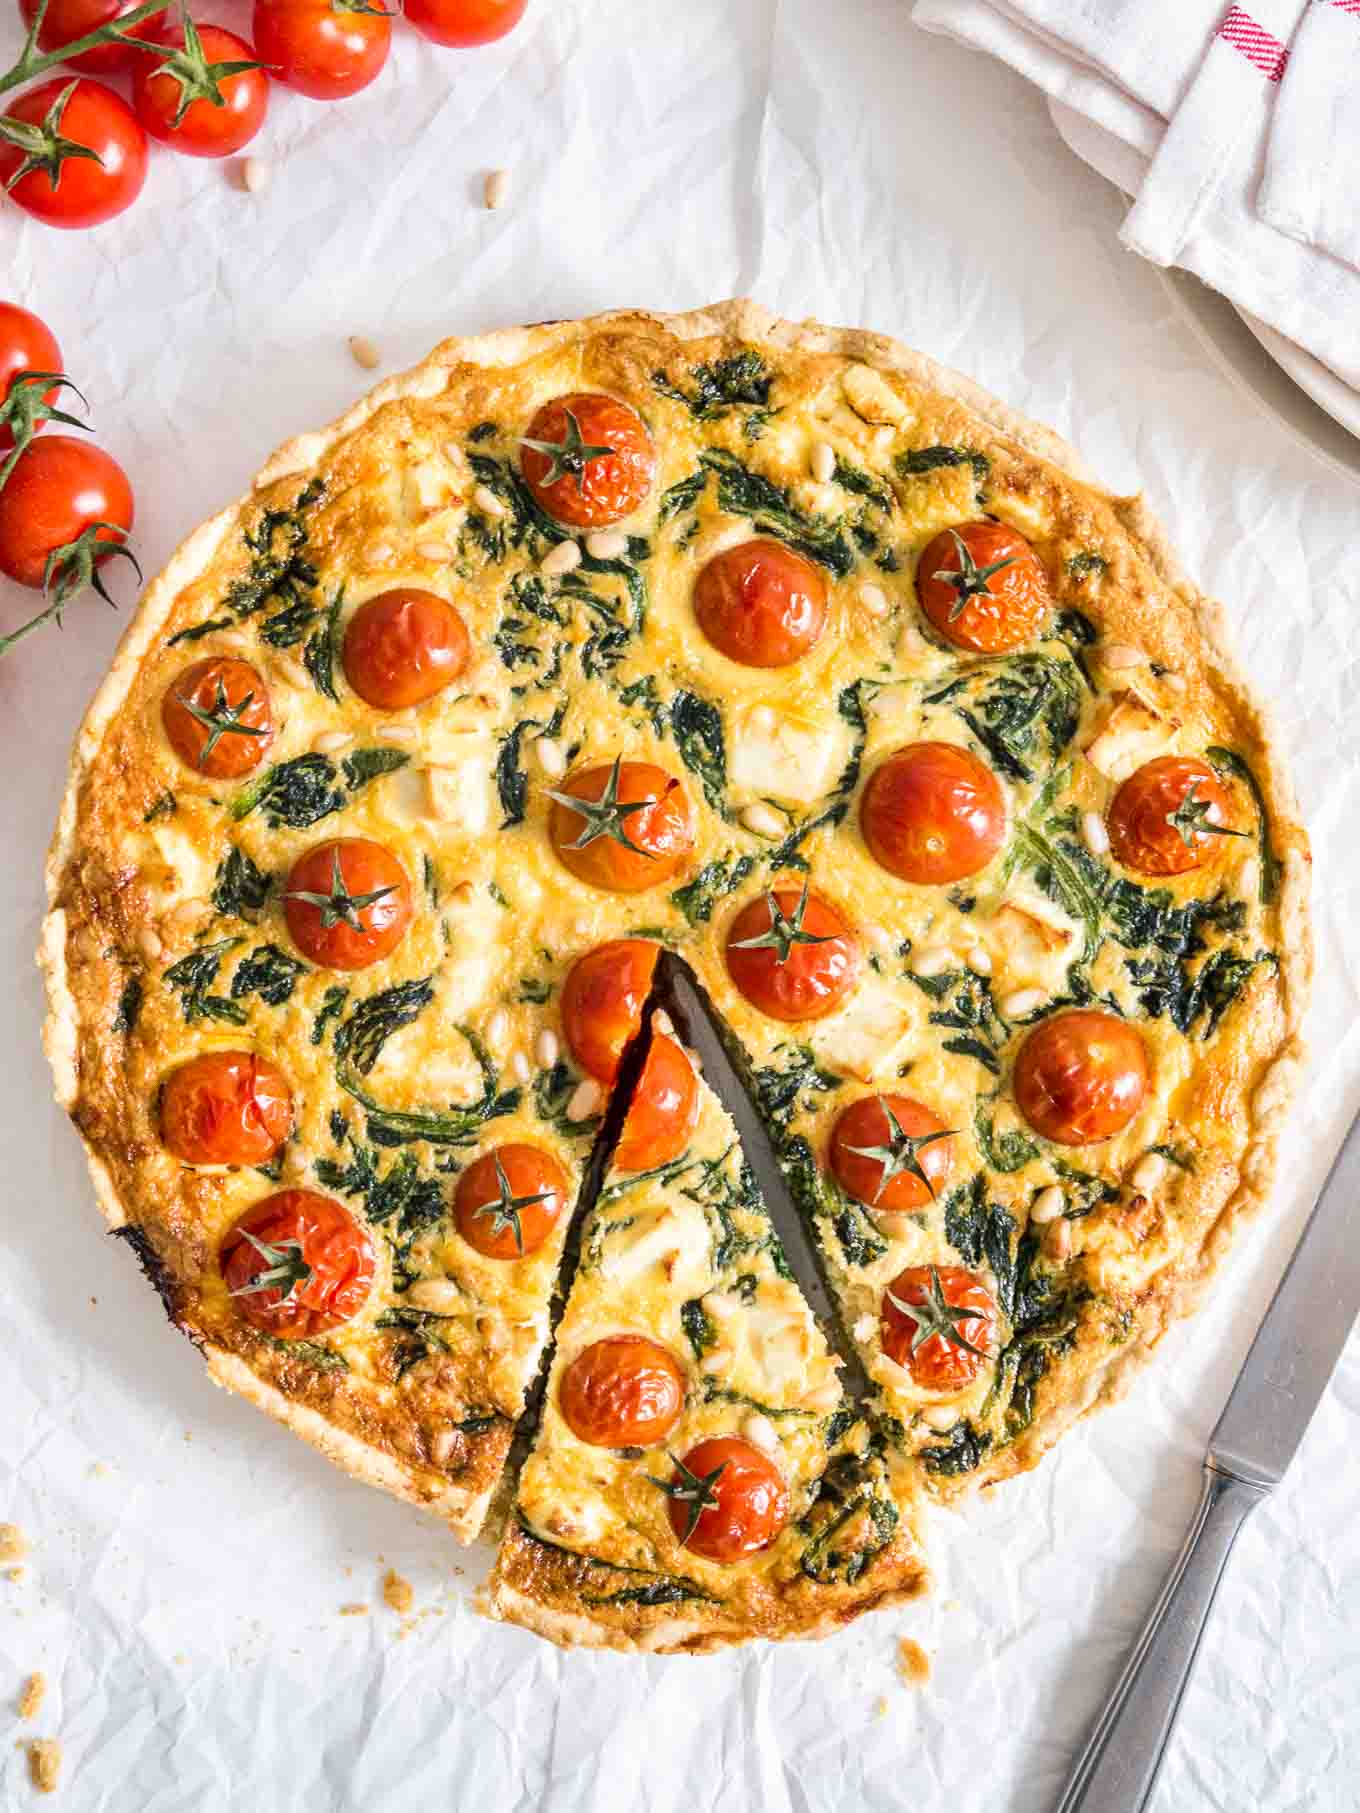 Spinach Quiche with Tomatoes and Cheese | Plated Cravings